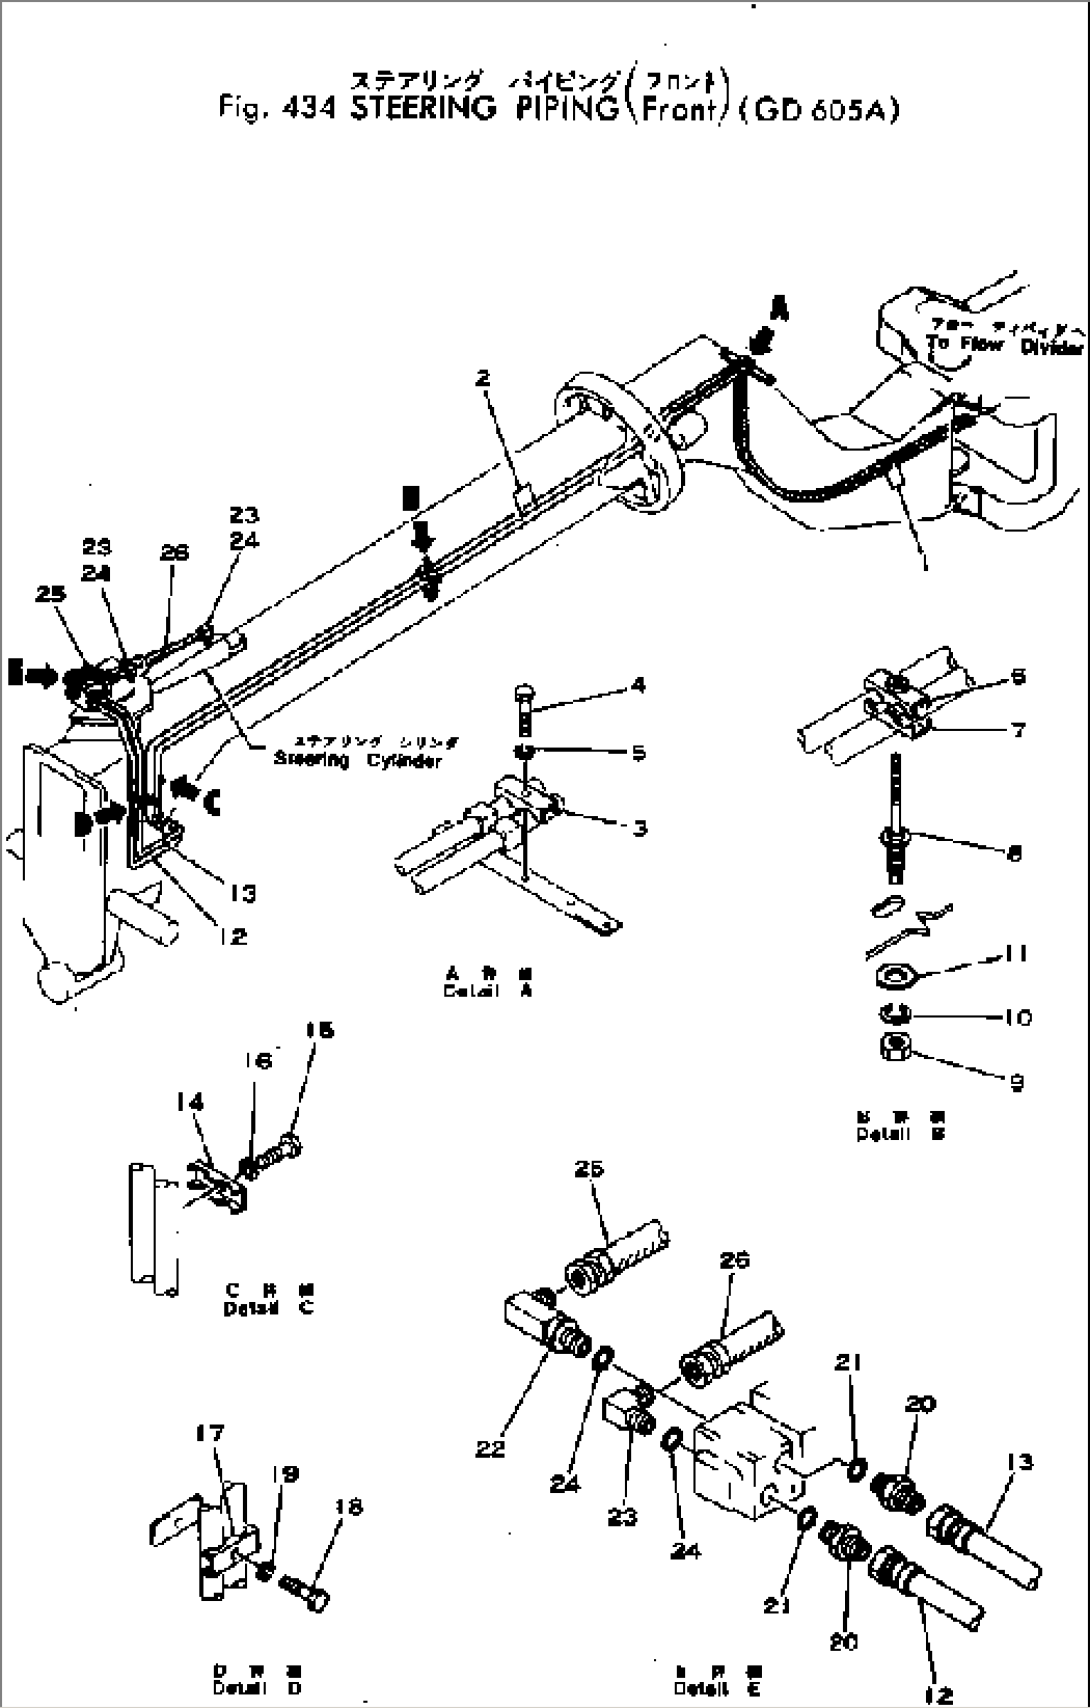 STEERING PIPING (FRONT)